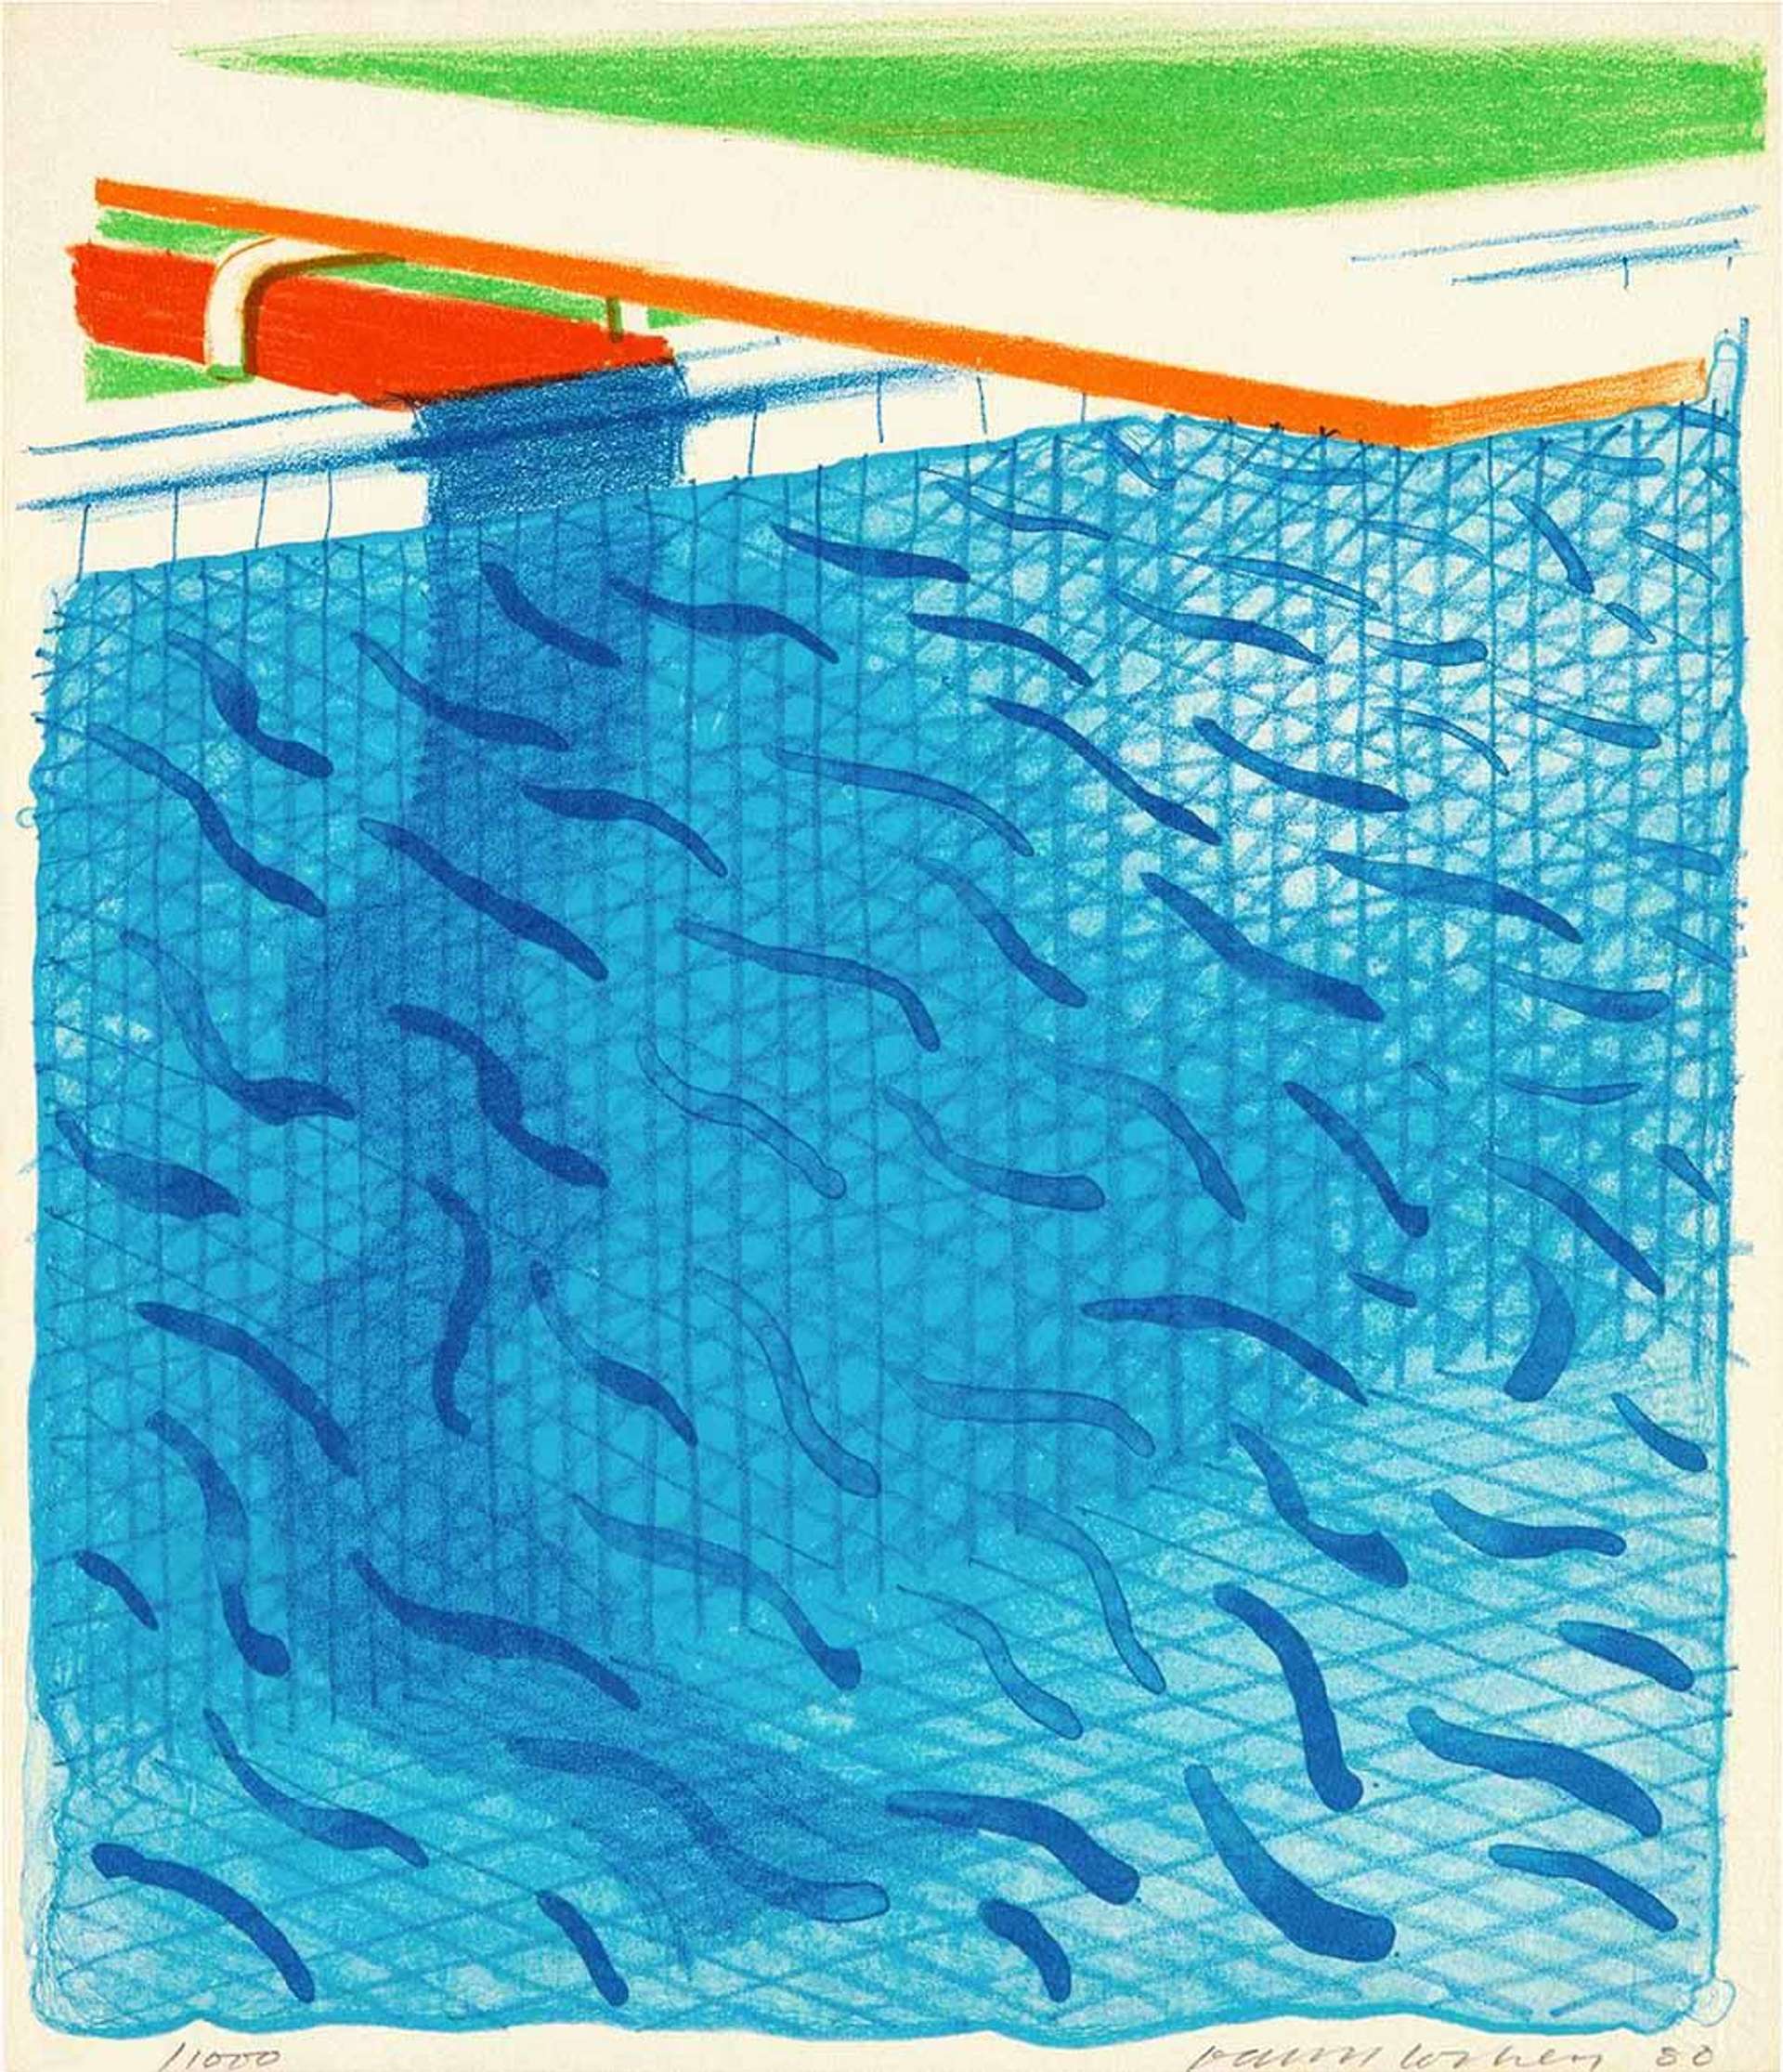 In this print by David Hockney, the water occupies almost the entire surface of the image, exhibiting simplicity of composition coupled with precise details and crisp linear outlines. Because Hockney experiments with diverse shades of the blue colour, the representation of water becomes complex and multidimensional. A square tile pattern pokes through the surface, revealing the depth of the swimming pool as well as the lustre surface of its bottom.